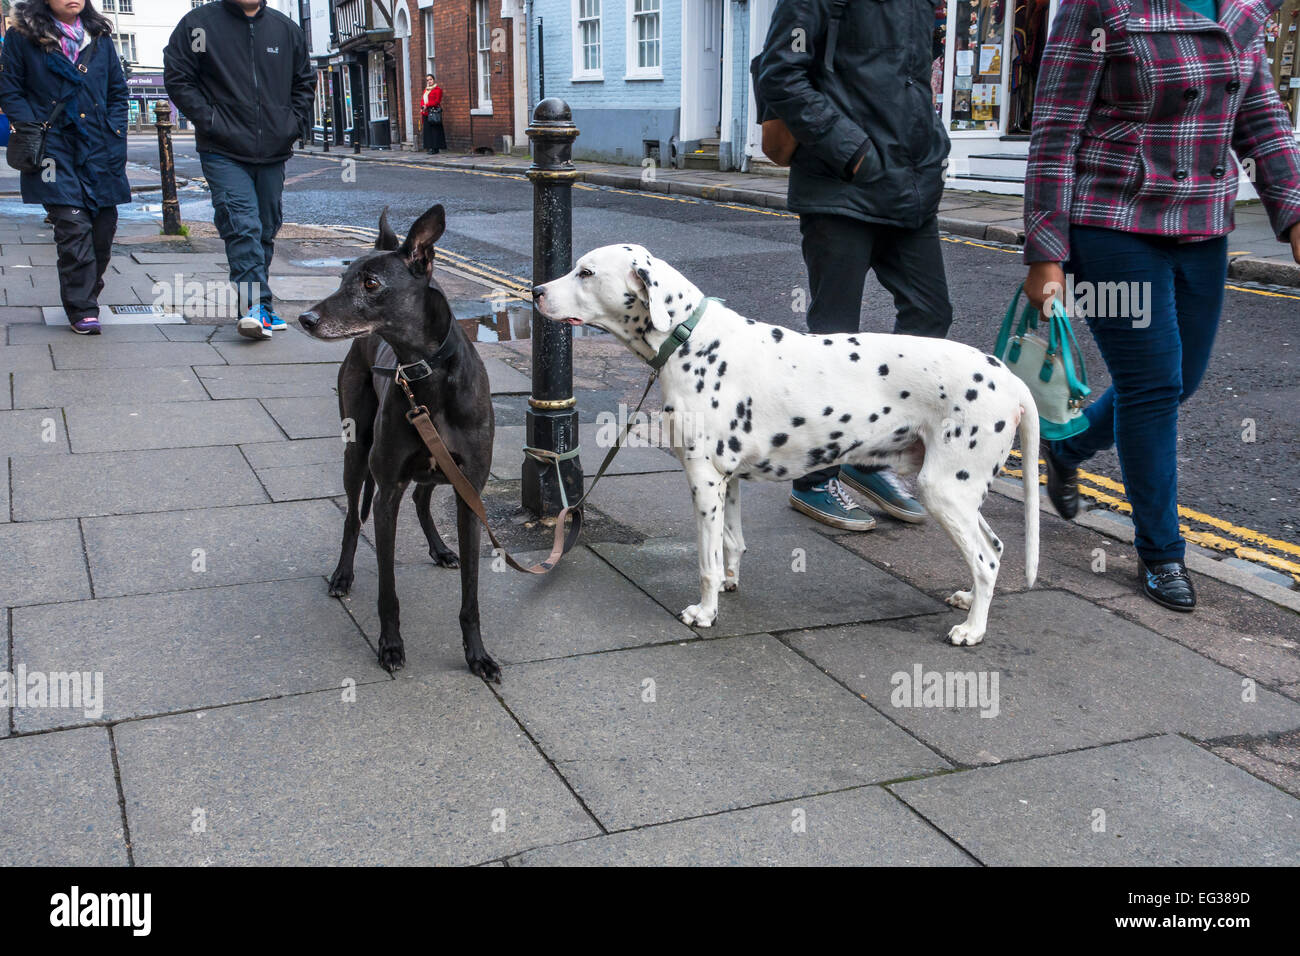 Dogs left tied up by owner while shopping. Stock Photo